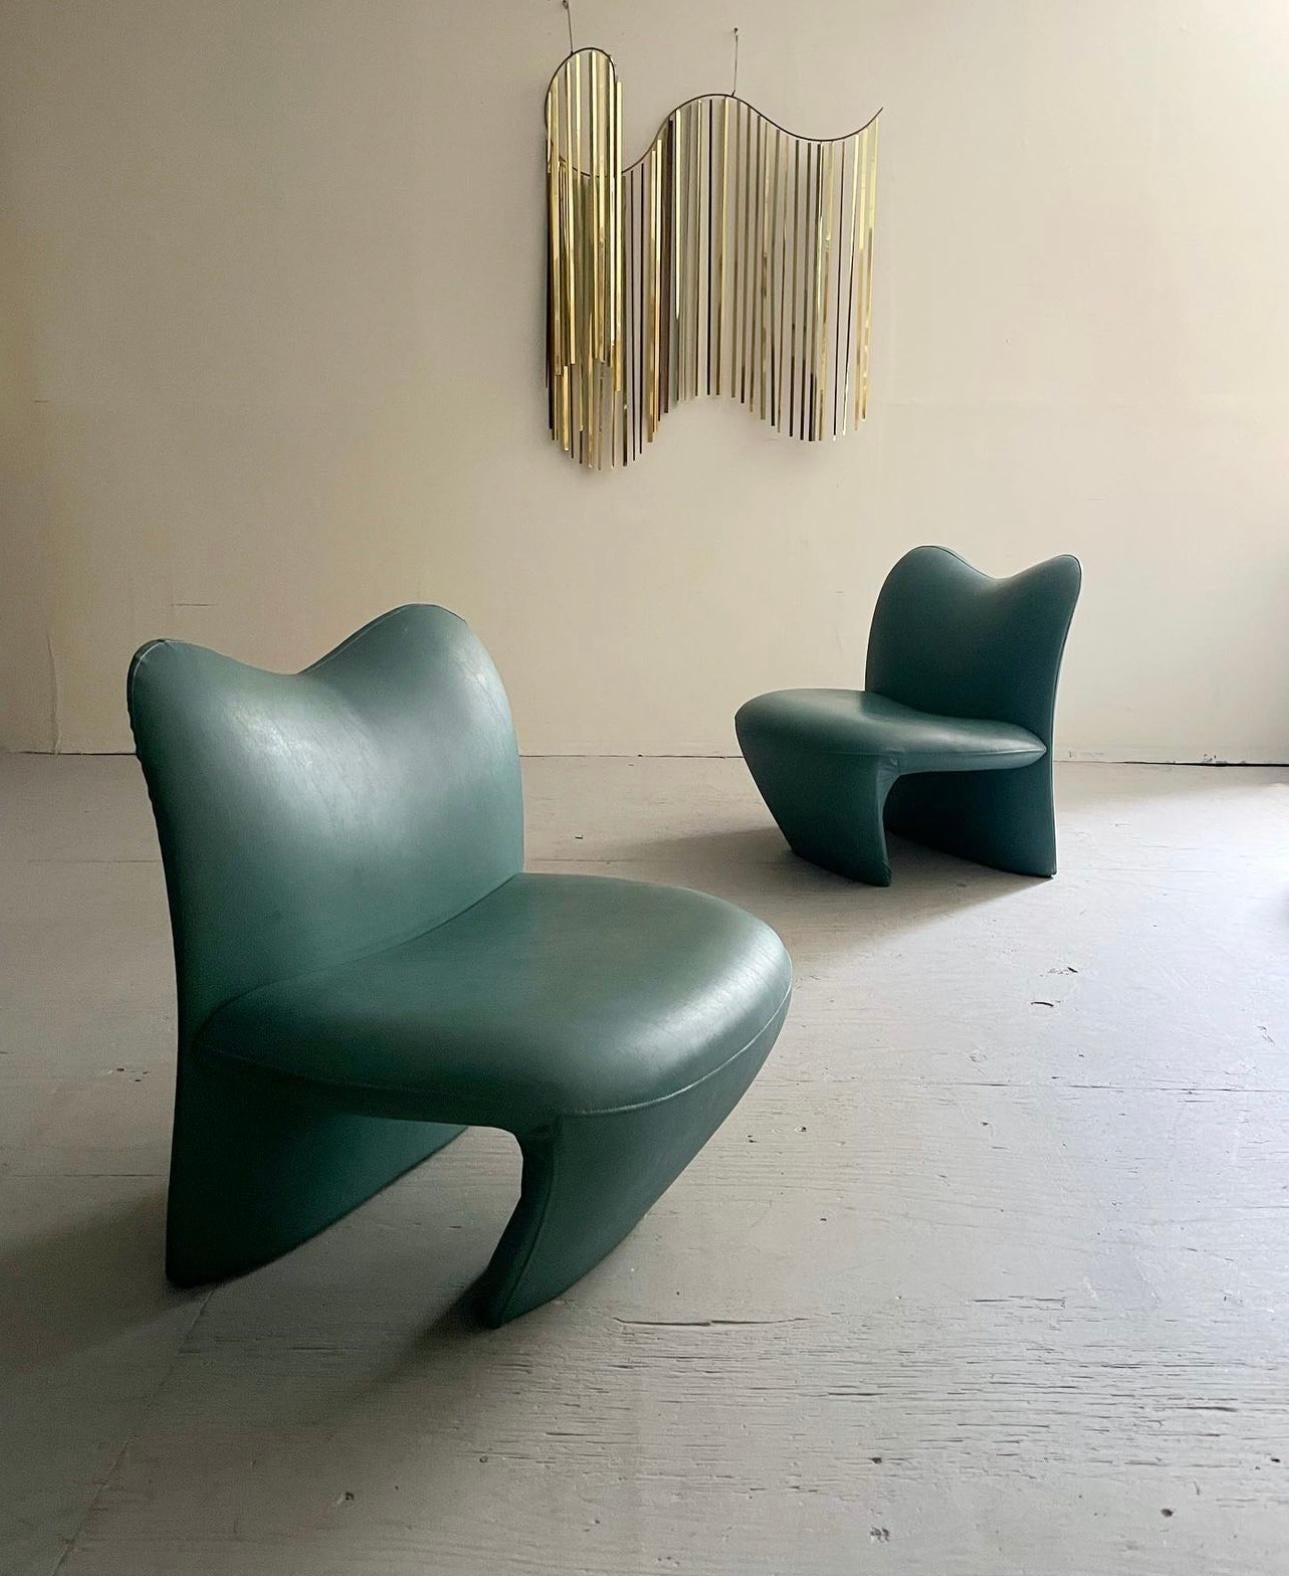 Pair of Post Modern “Multipla”Lounge Chairs Designed by Jane Dillon & Peter Wheeler. These sculptural lounge chairs feature a biomorphic silhouette upholstered in a leather teal fabric. Jane Dillon studied under Ettore Sottsass in the late 1960s and